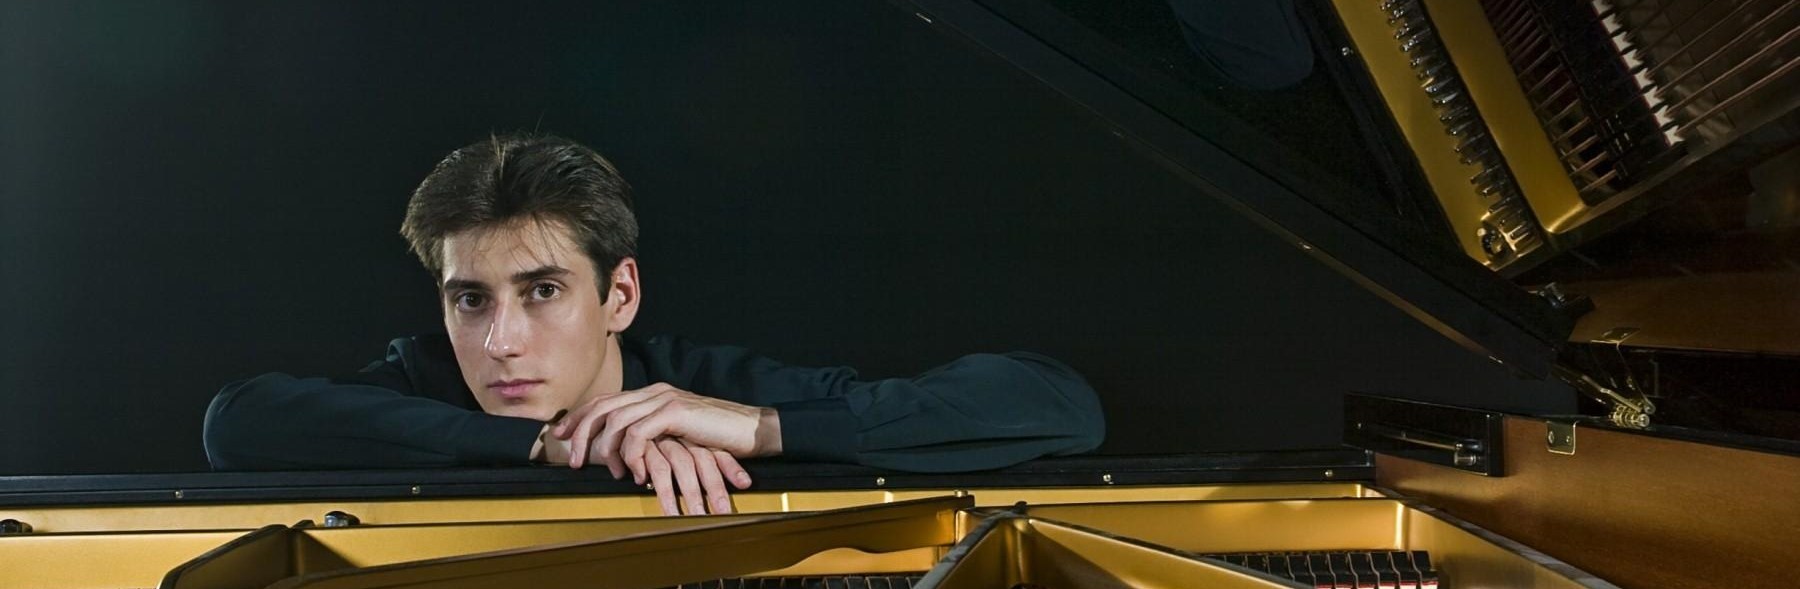 RUSSIA, GERMANY, BRITAIN AND BEYOND: Harriman series brings pianistic giant for a second visit